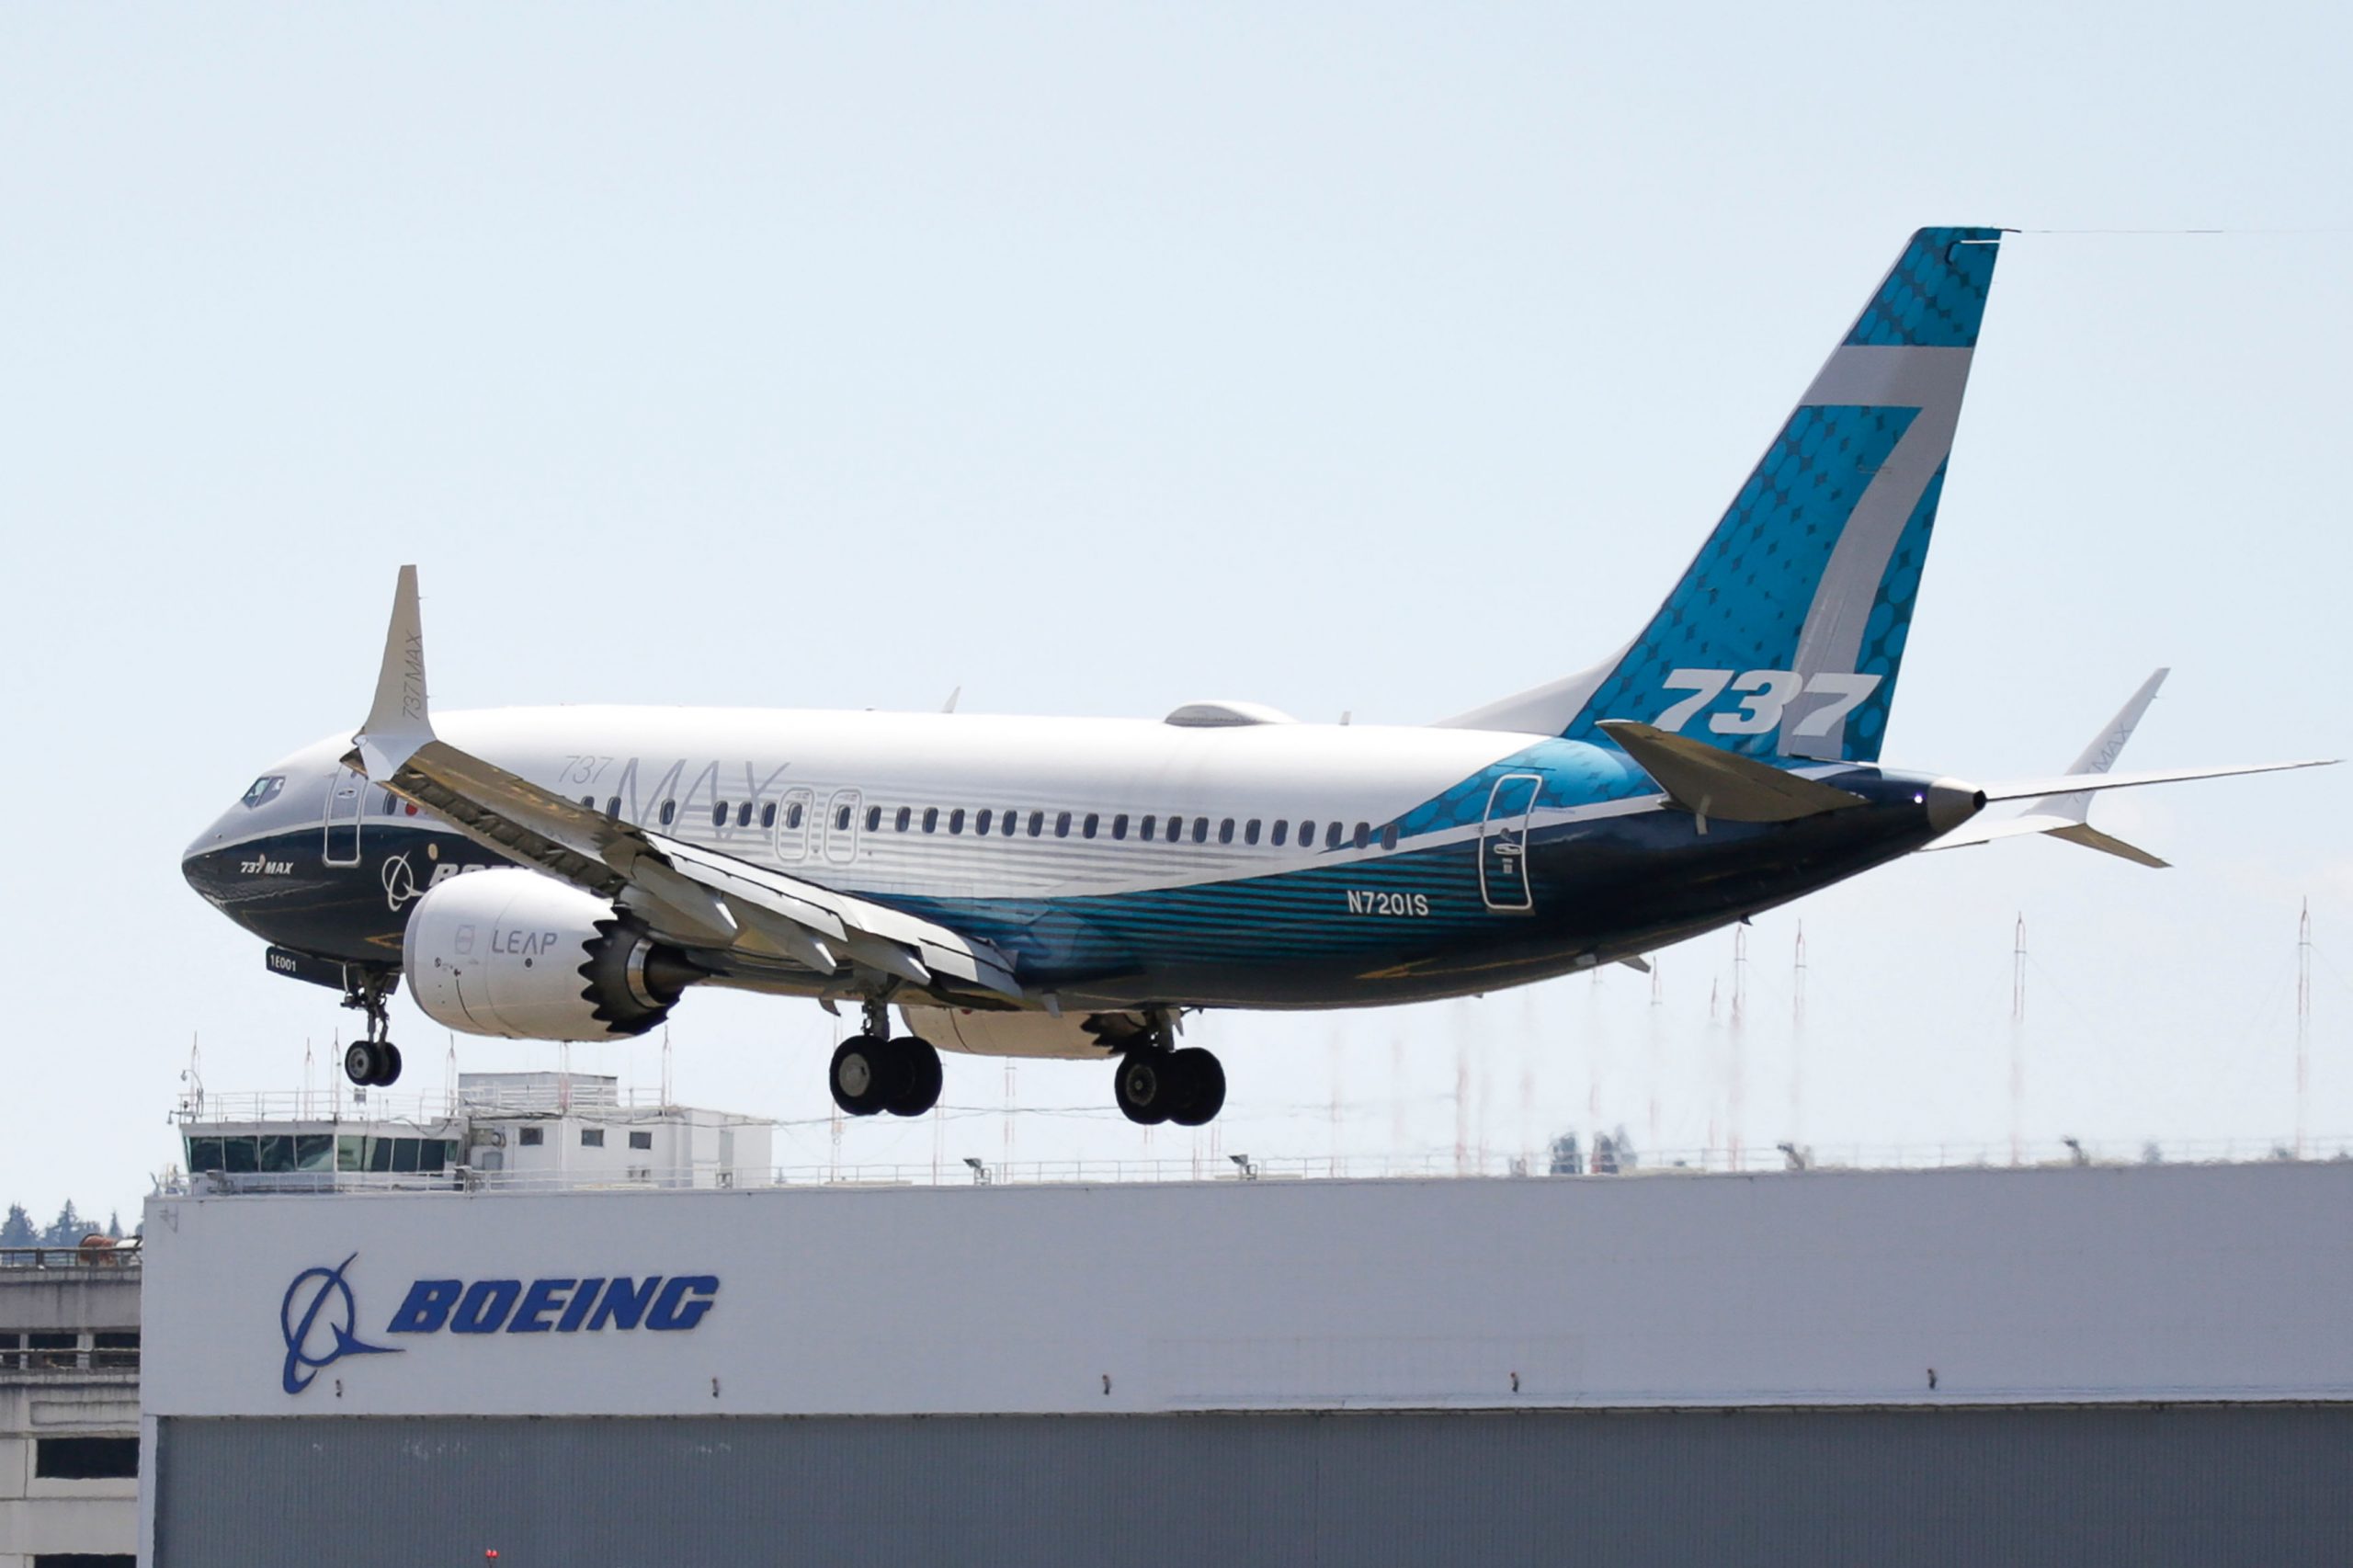 Boeing 737 Max approved for European skies after technical corrections